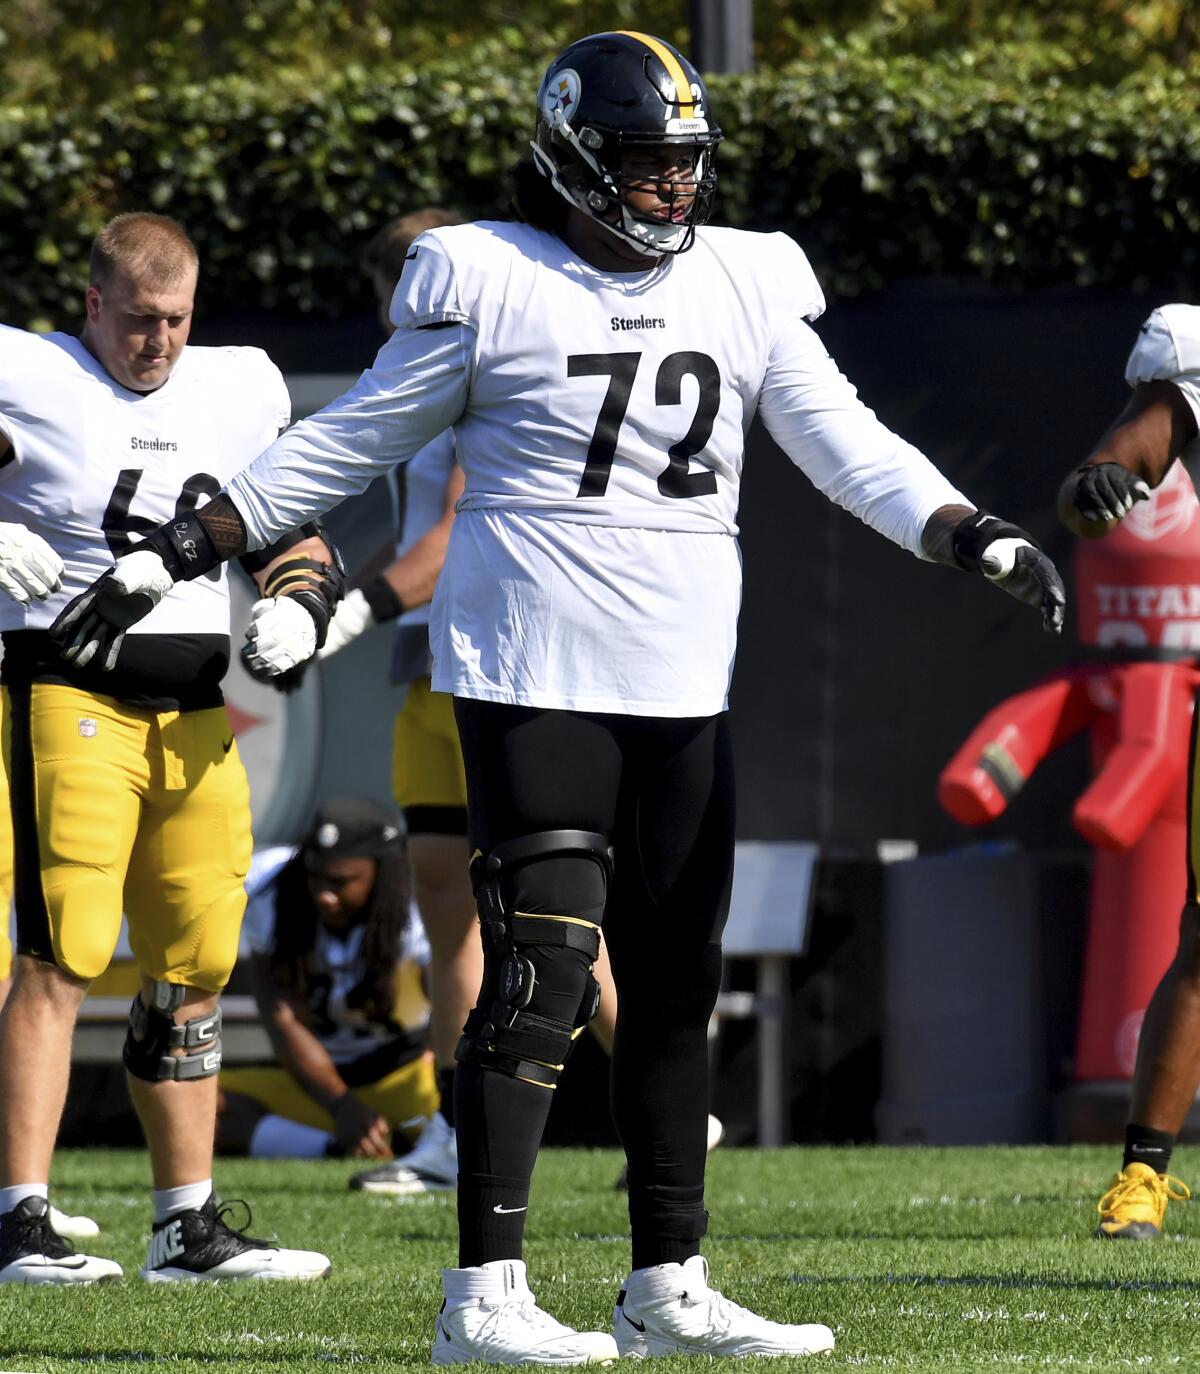 Pittsburgh Steelers offensive tackle Zach Banner stretches during NFL football practice, Wednesday, Oct. 6, 2021, in Pittsburgh. (Matt Freed/Pittsburgh Post-Gazette via AP)